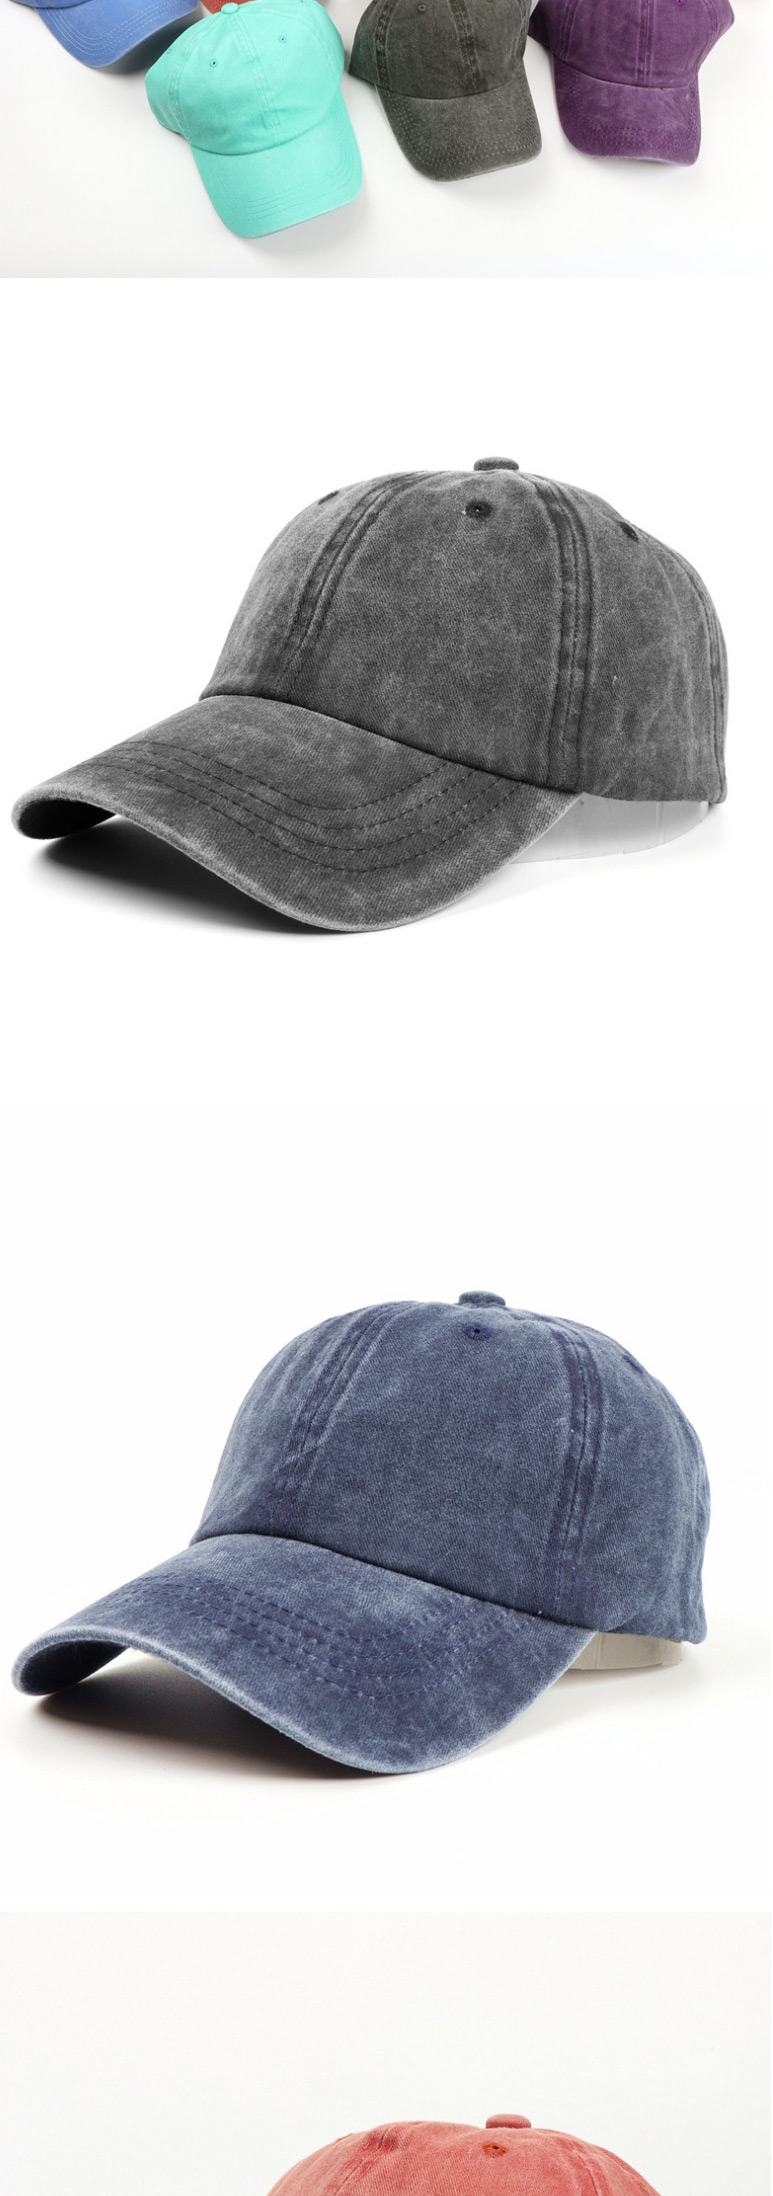 Fashion Red Wine Washed Distressed Denim Soft Top And Curved Brim Cap,Baseball Caps